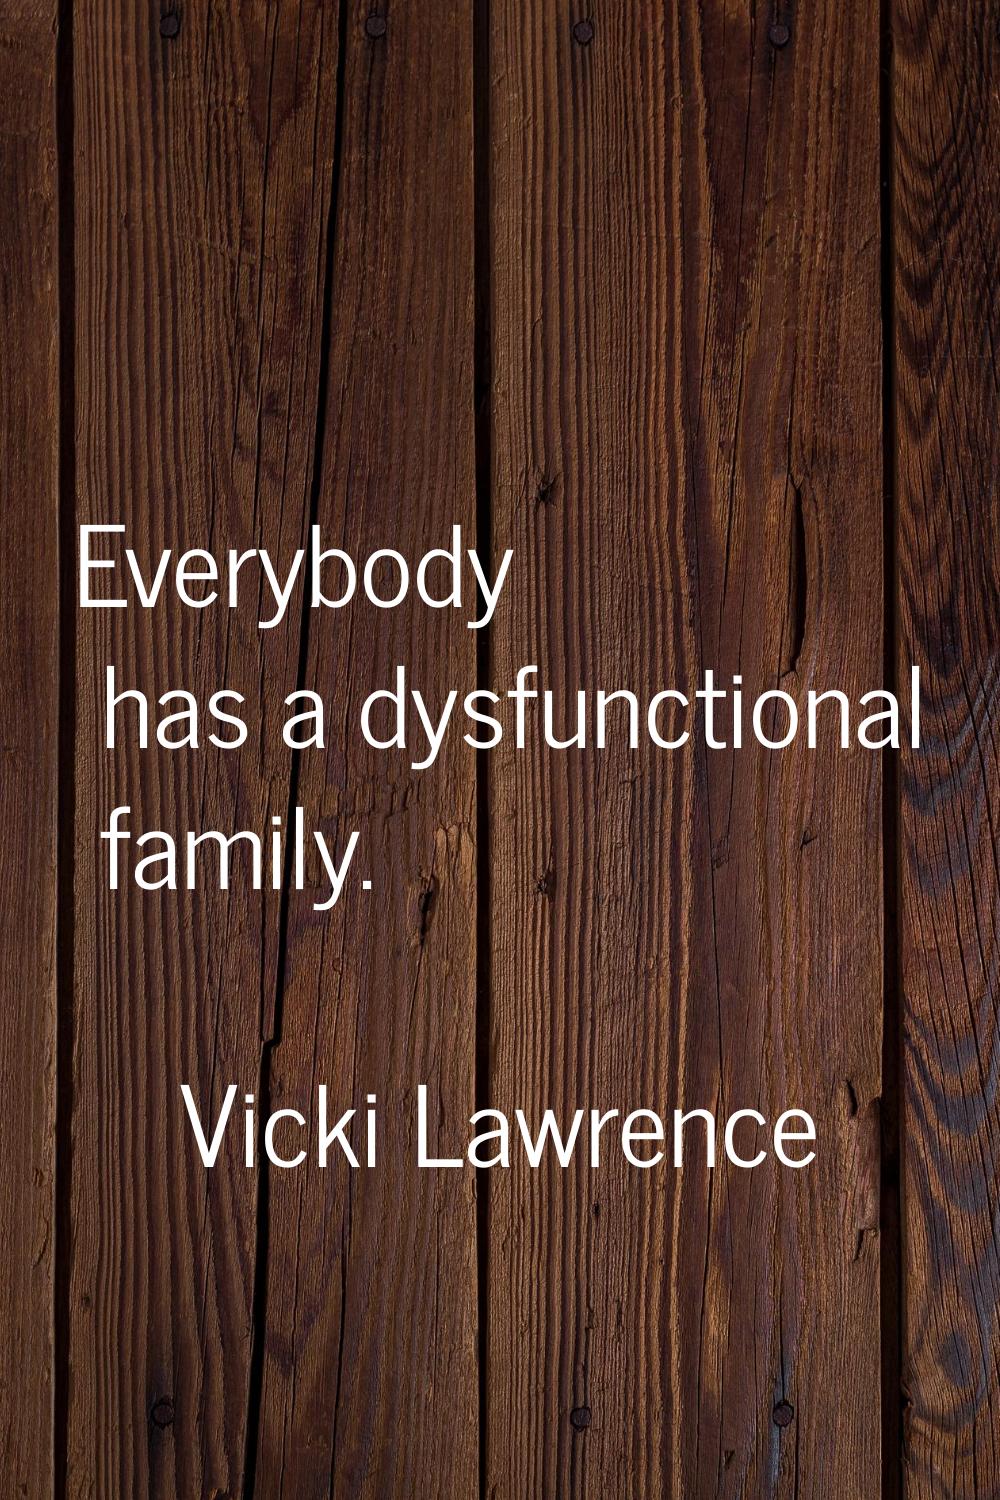 Everybody has a dysfunctional family.